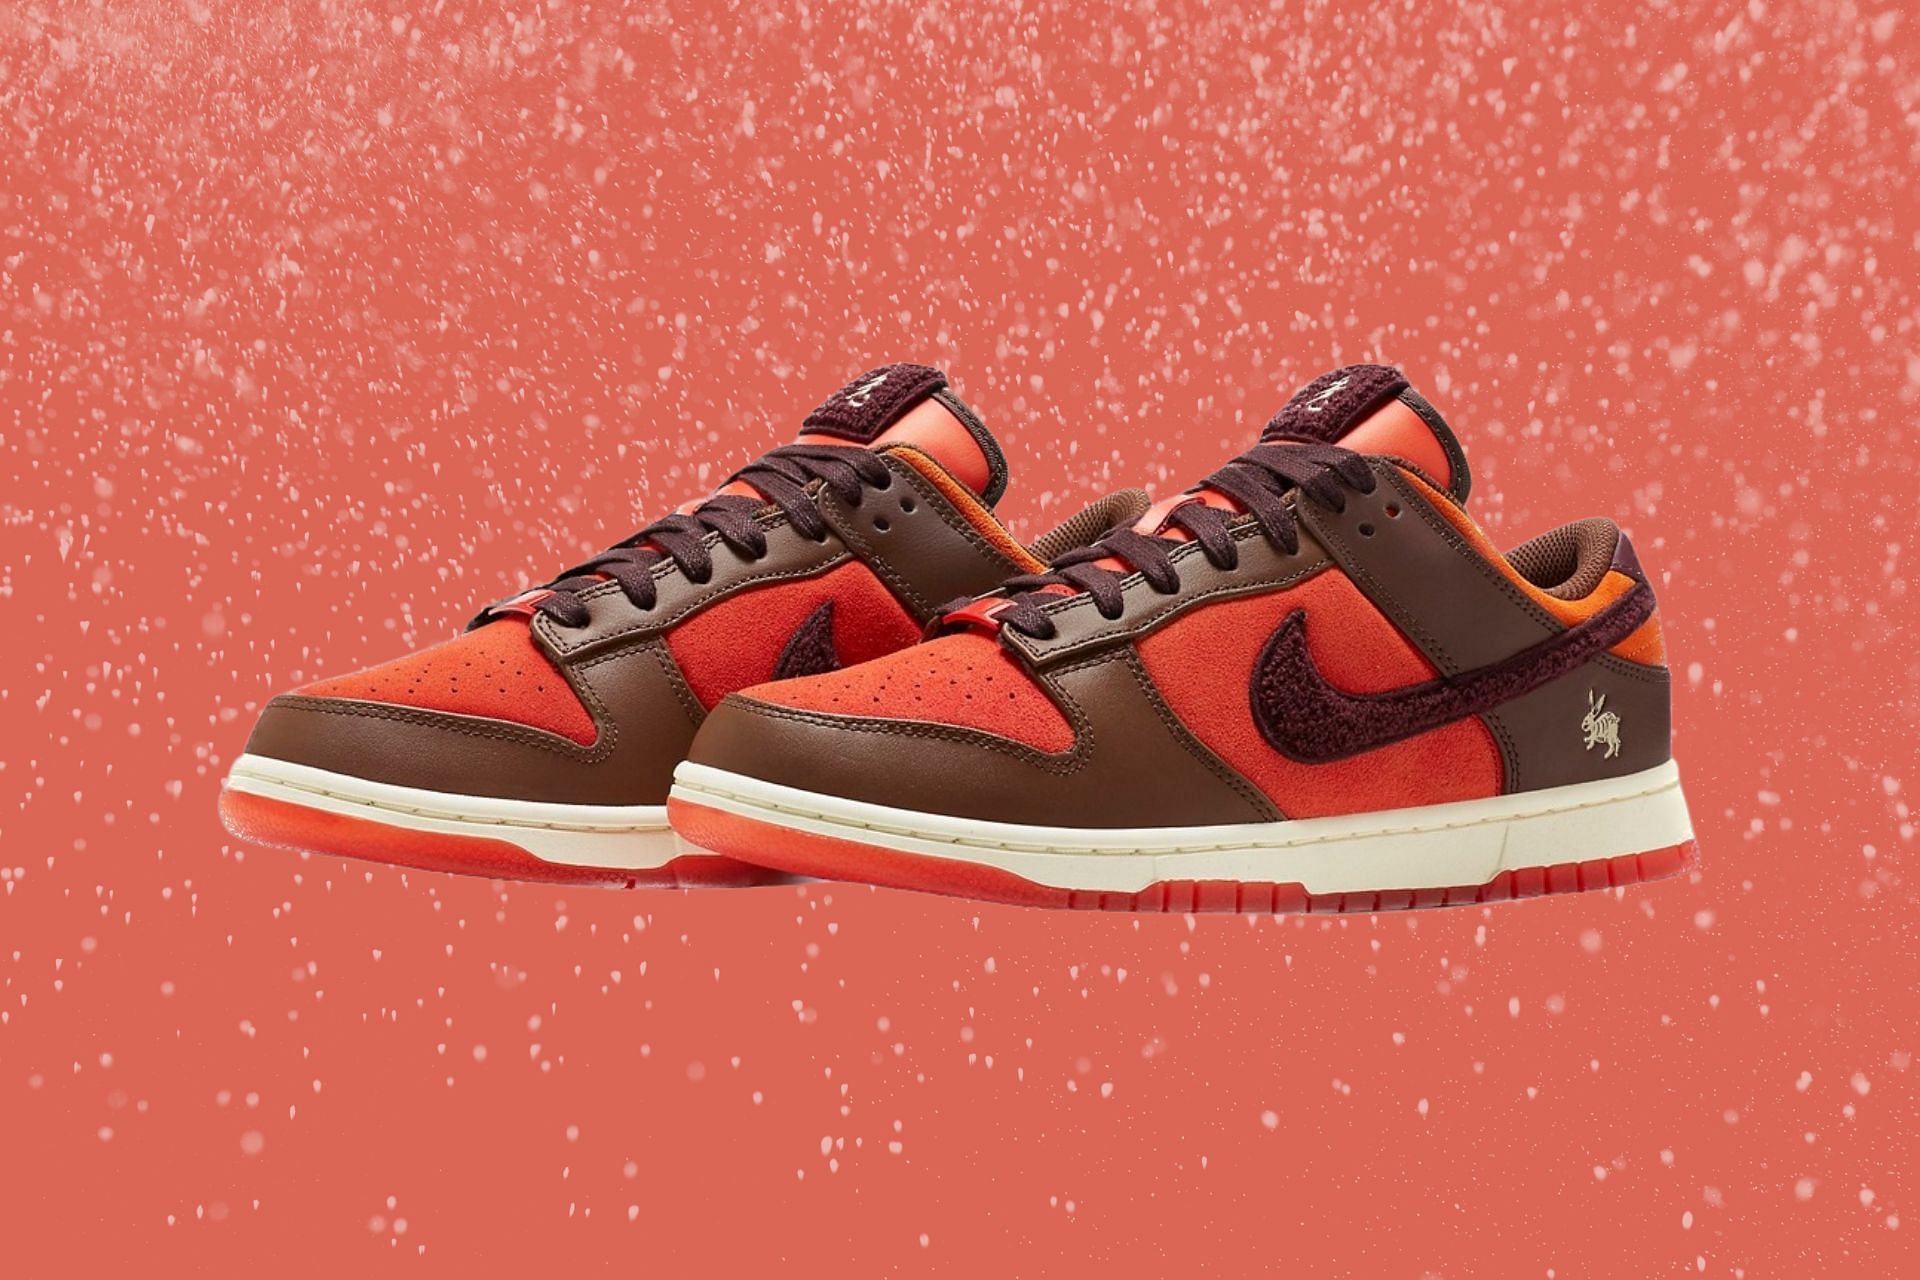 Nike Dunk Low Year of the Rabbit shoes (Image via Nike)